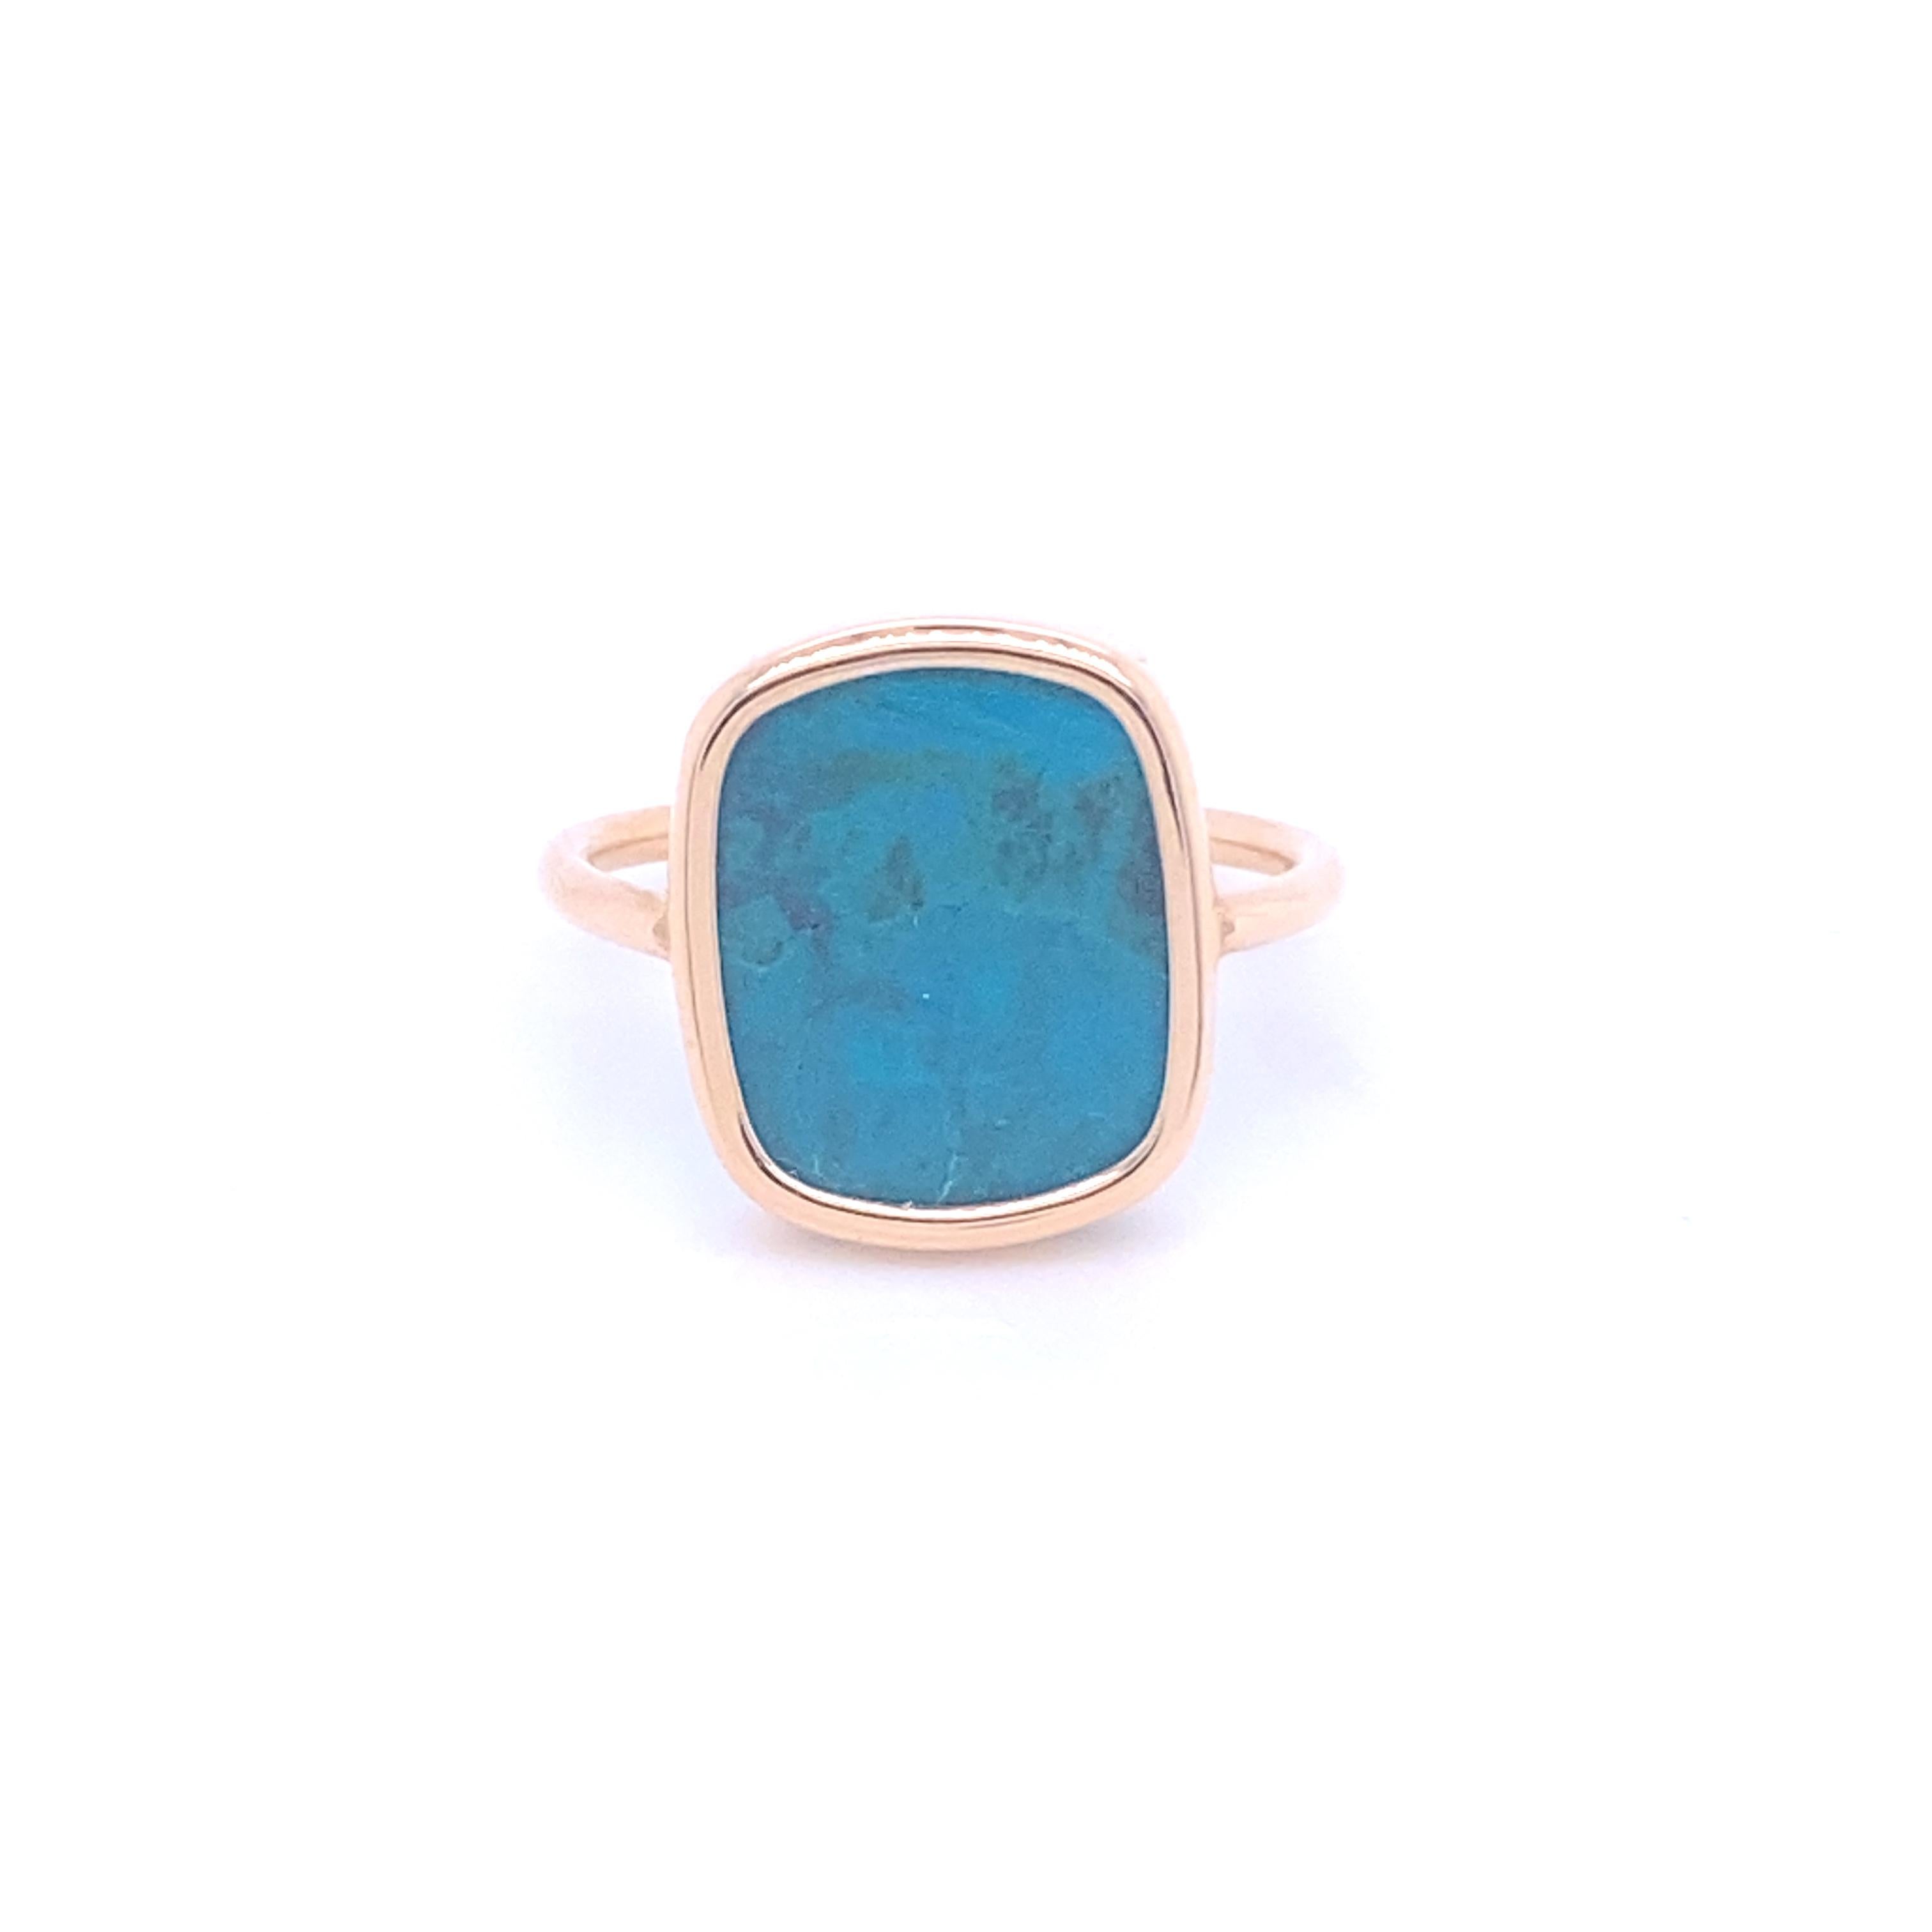 Discover this magnificent ring in 18-carat pink gold, featuring a superb chrysocolla. The chrysocolla measures 1.4 cm long and 1.1 cm wide, offering a remarkable presence on your finger.

Rose gold brings a touch of warmth and elegance to this ring,